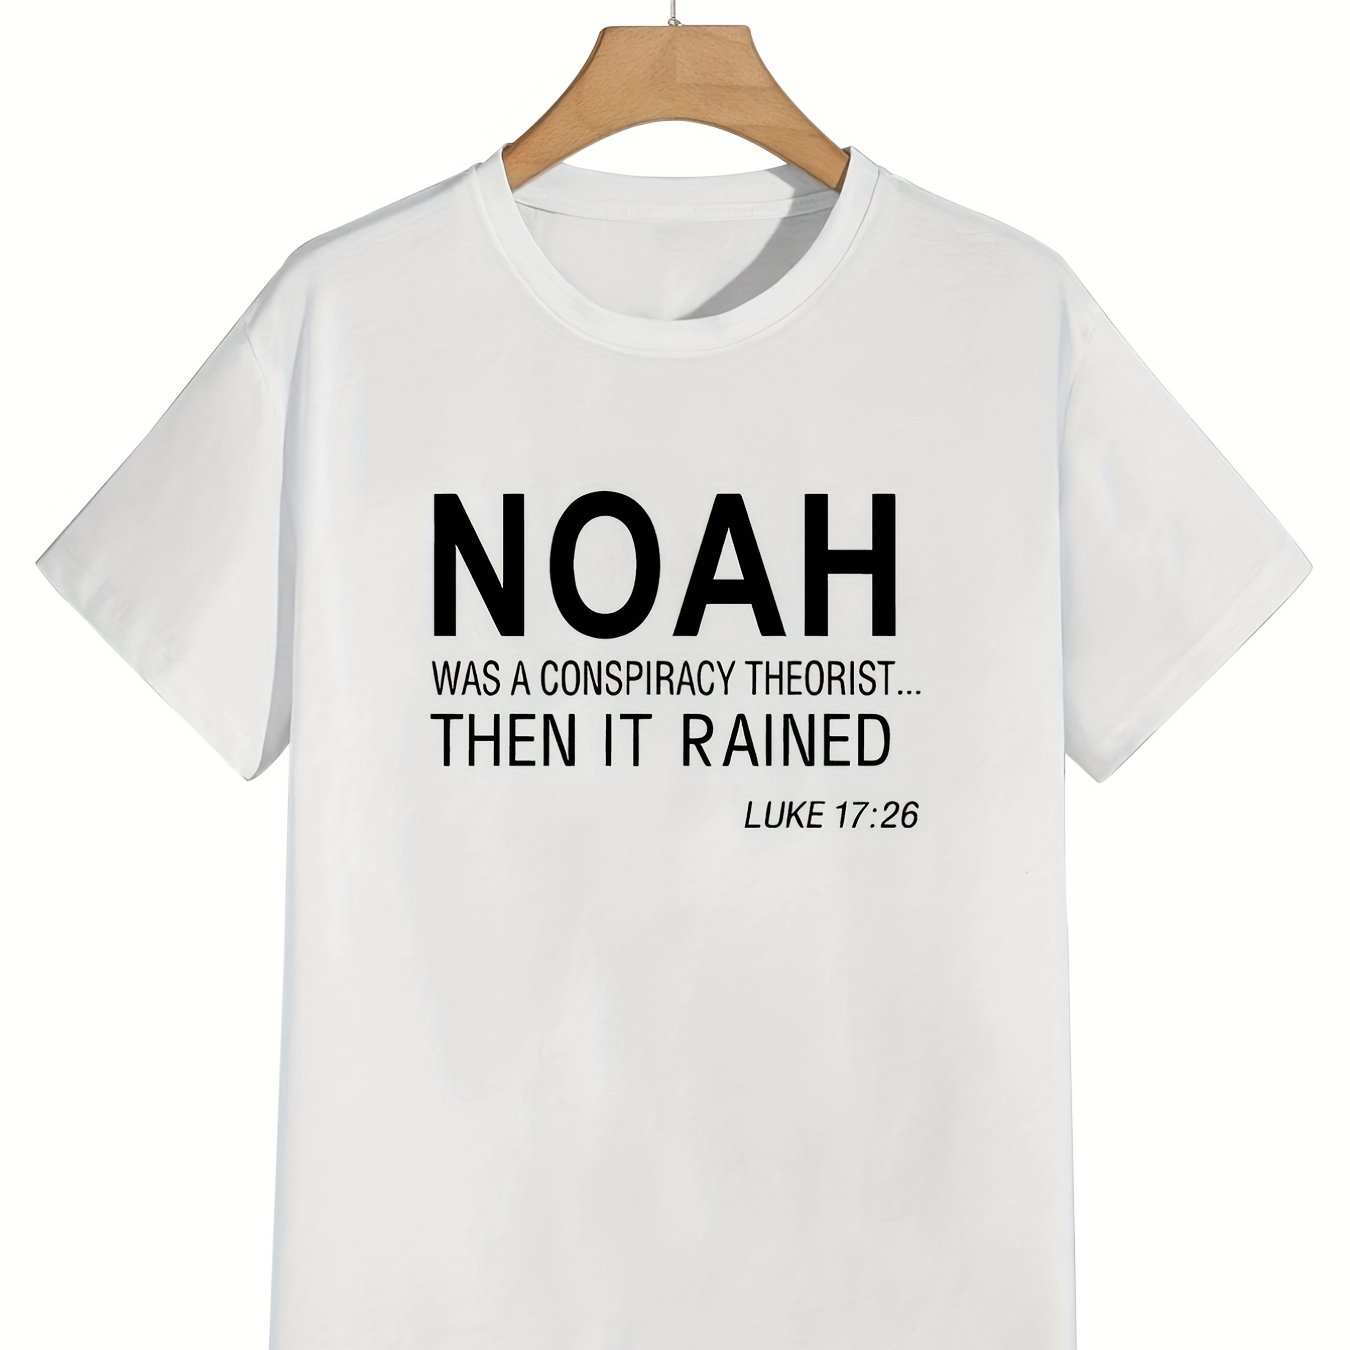 Plus Size Men's "Noah" Print T-shirts, Casual Oversized Graphic Tees For Summer Fitness Sports Leisurewear claimedbygoddesigns